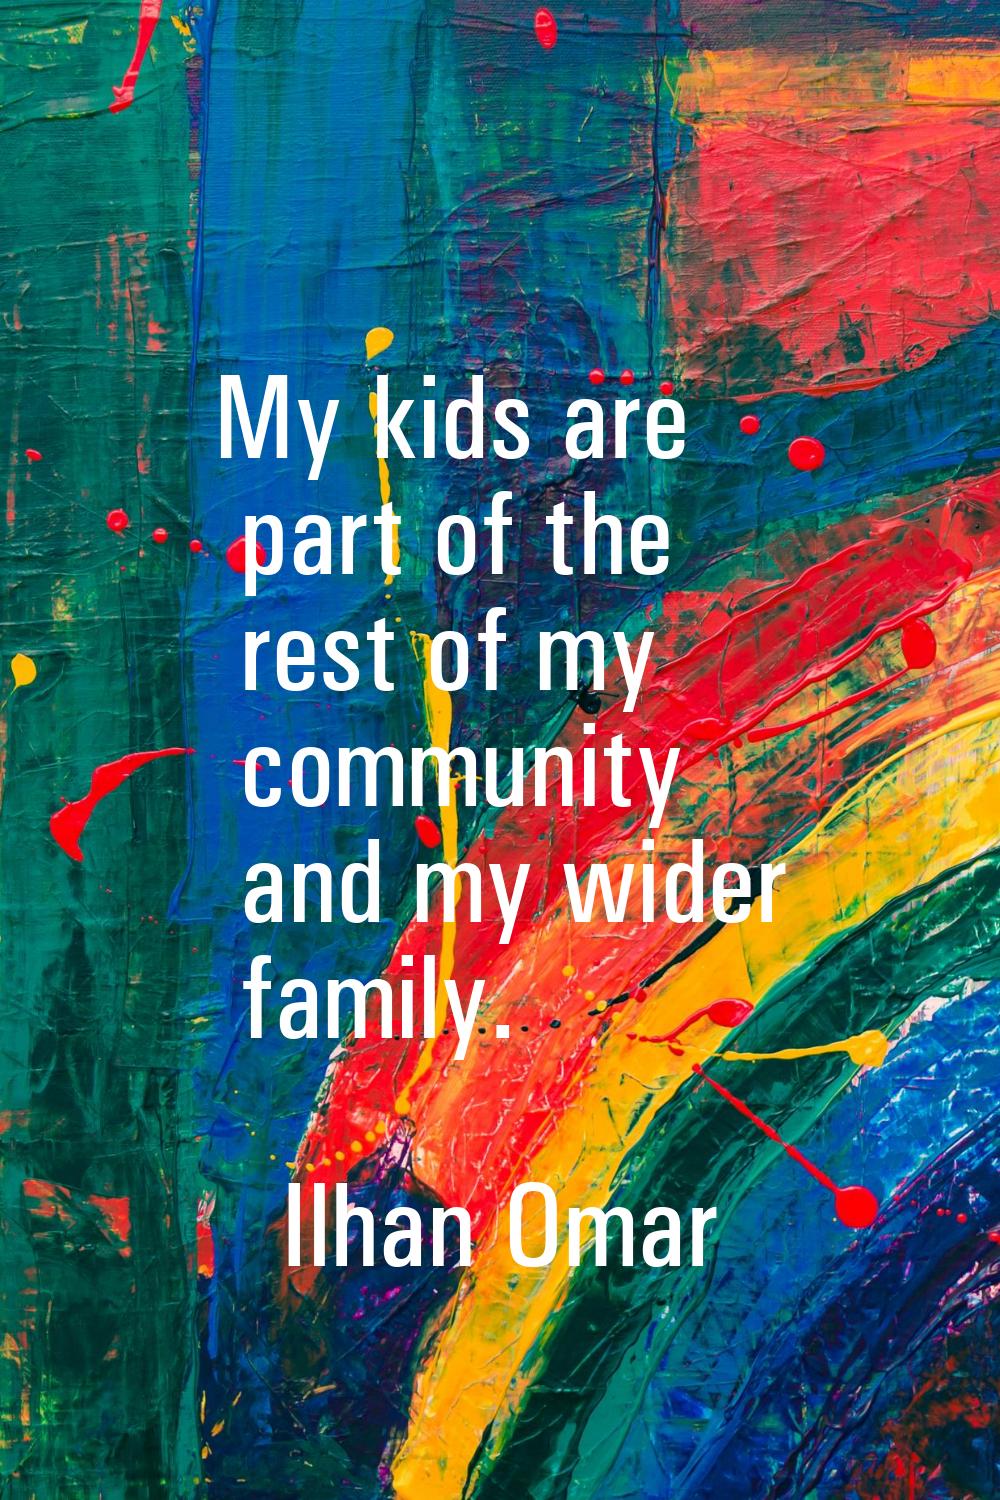 My kids are part of the rest of my community and my wider family.